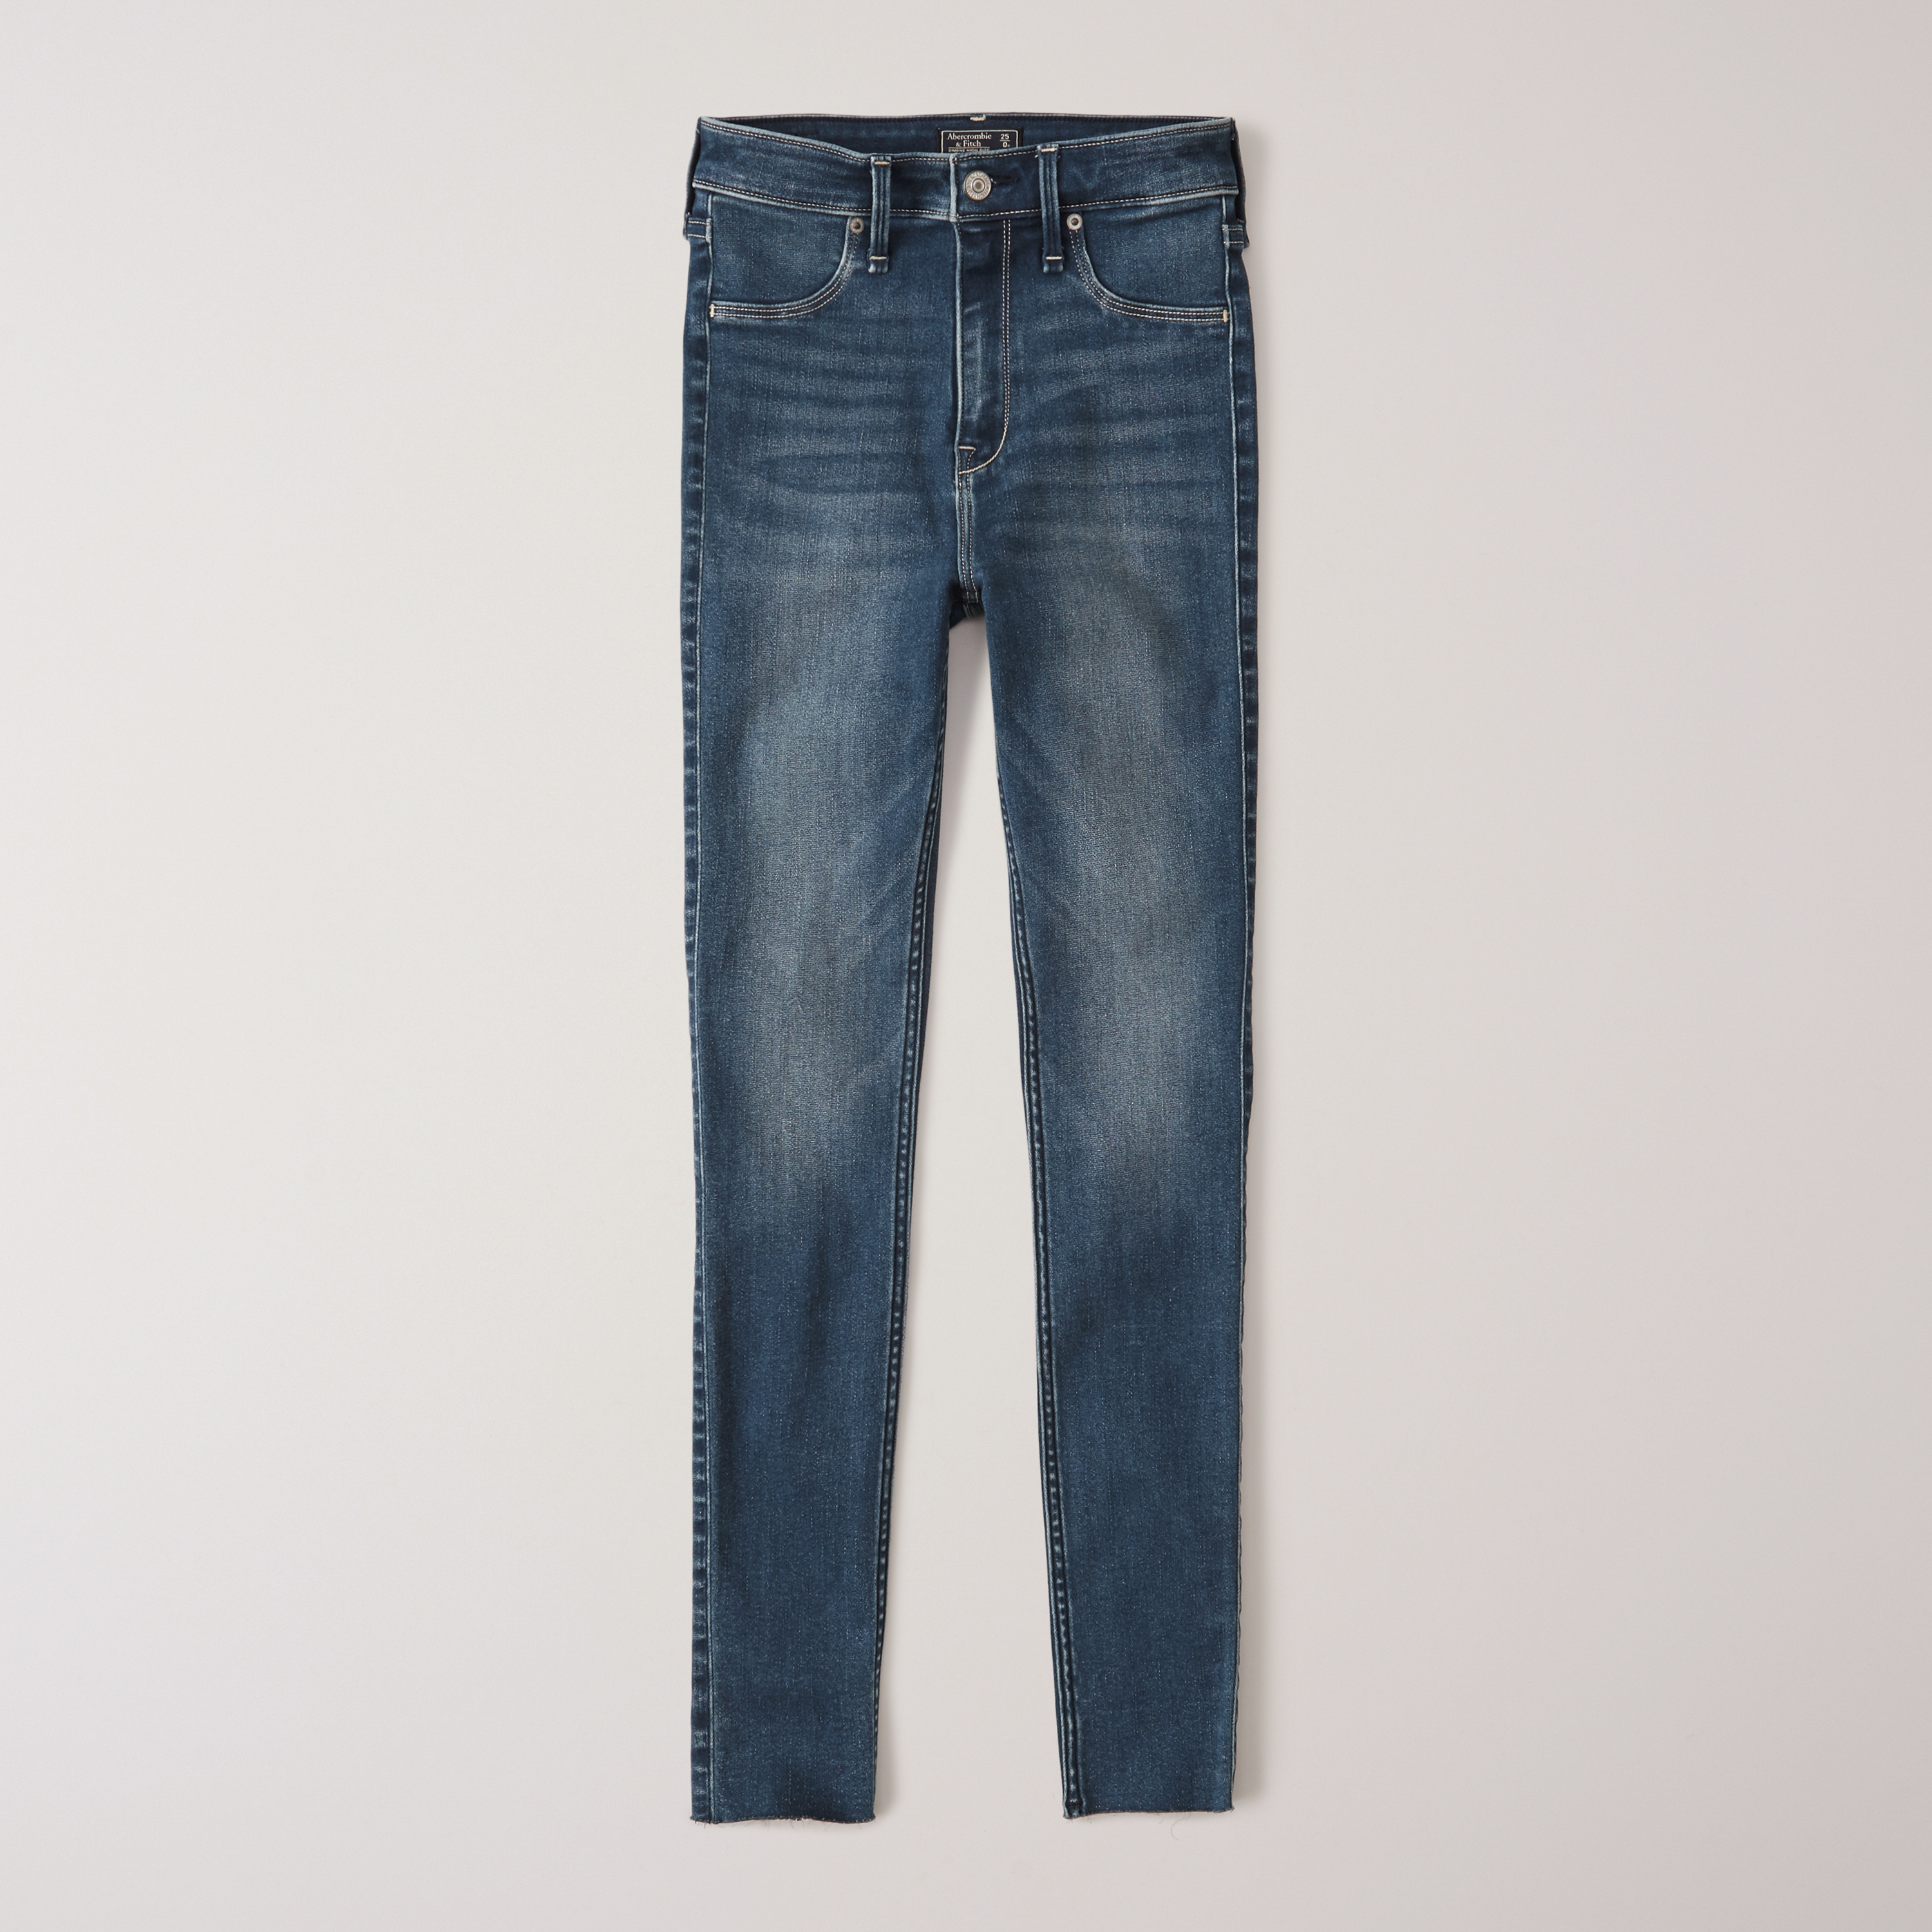 abercrombie fitch simone jeans review